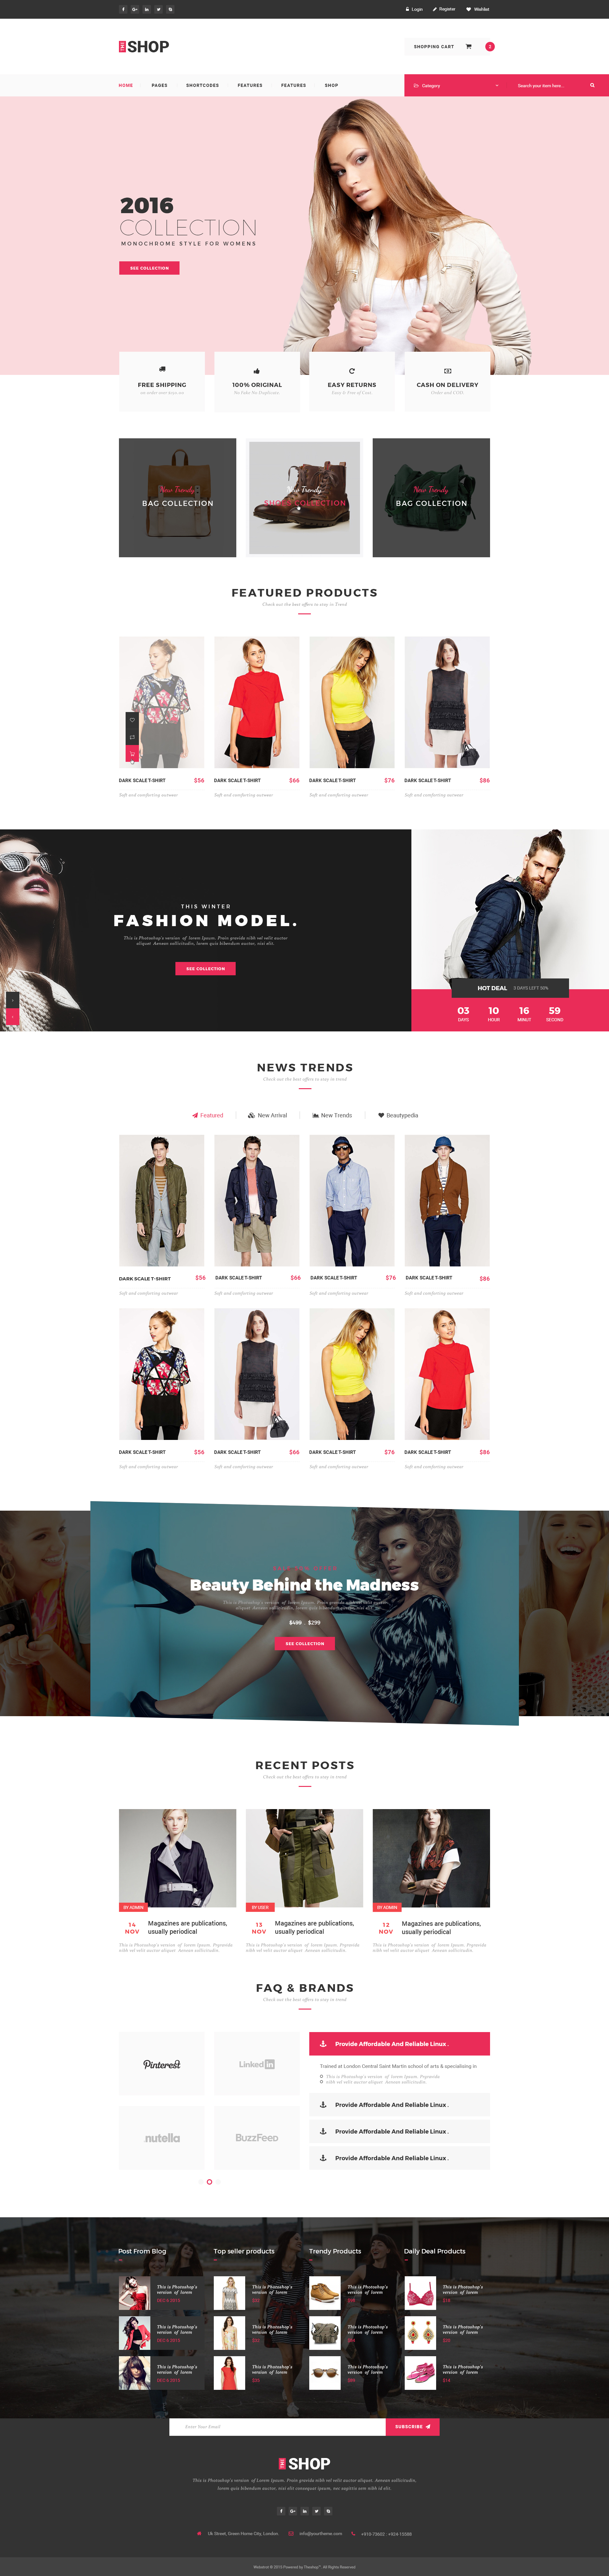 The Shop | e-commerce PSD Template by webstrot | ThemeForest